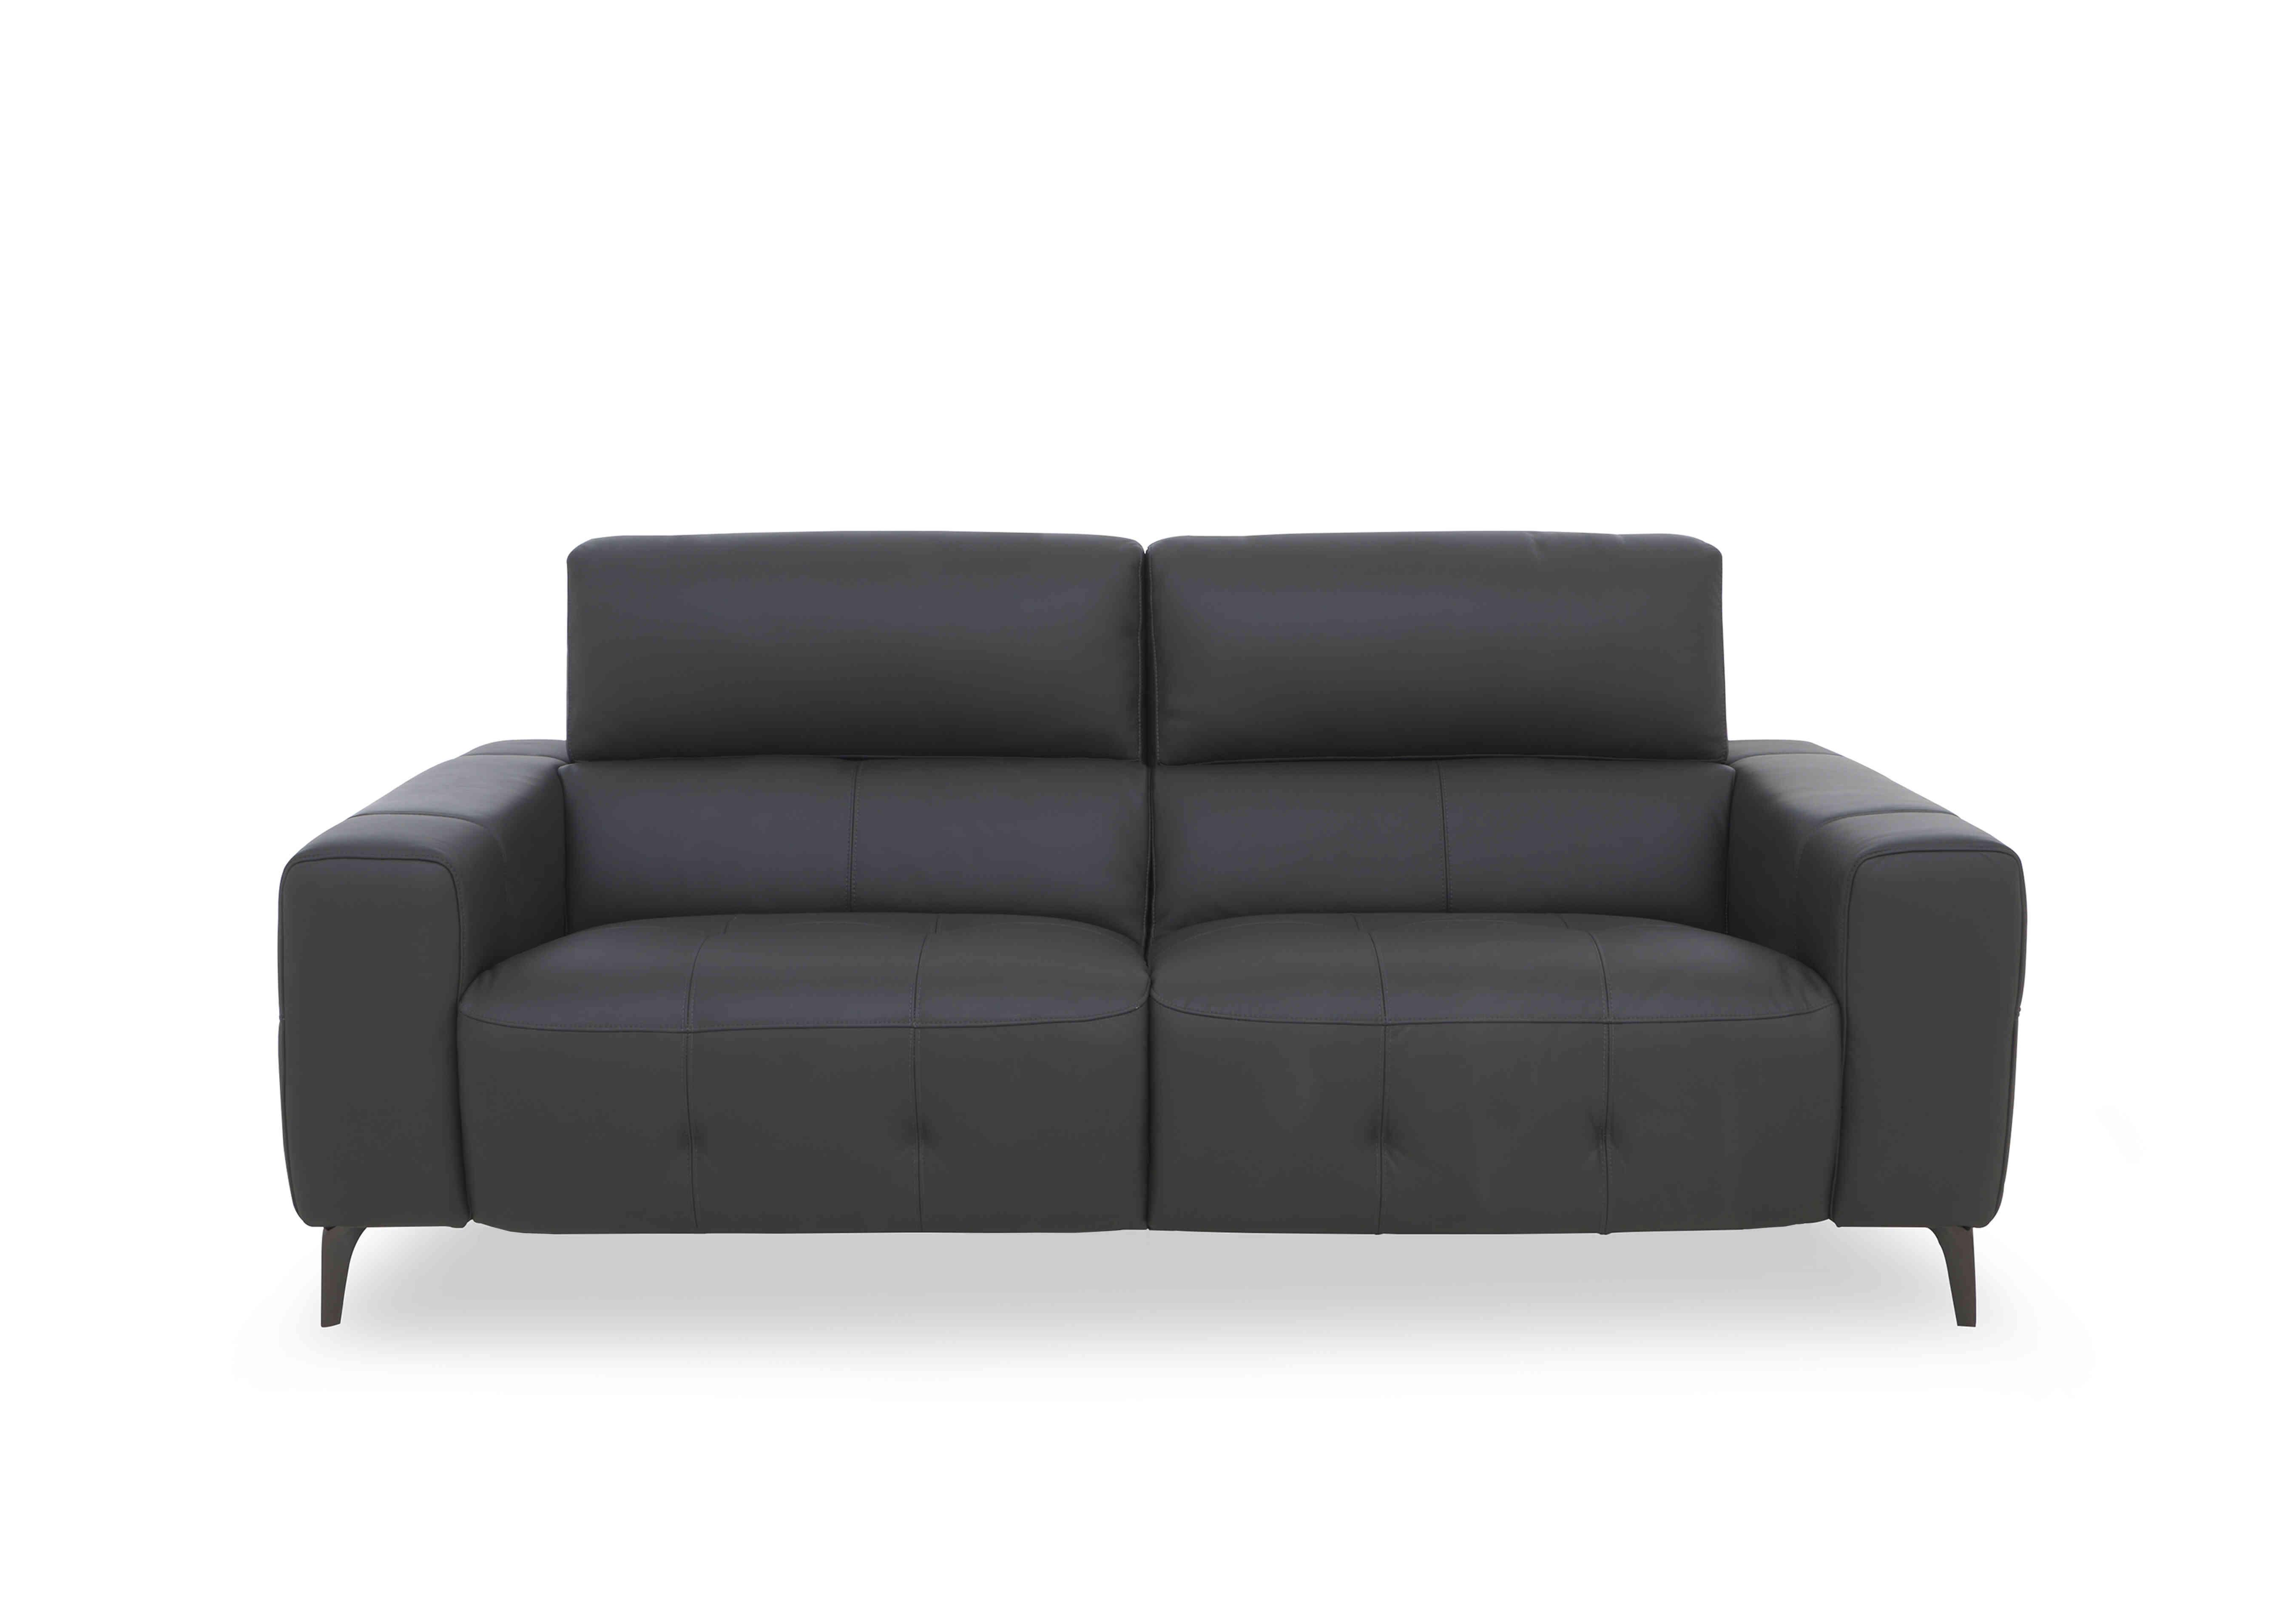 New York 3 Seater Leather Sofa in Nw-517e Shale Grey on Furniture Village